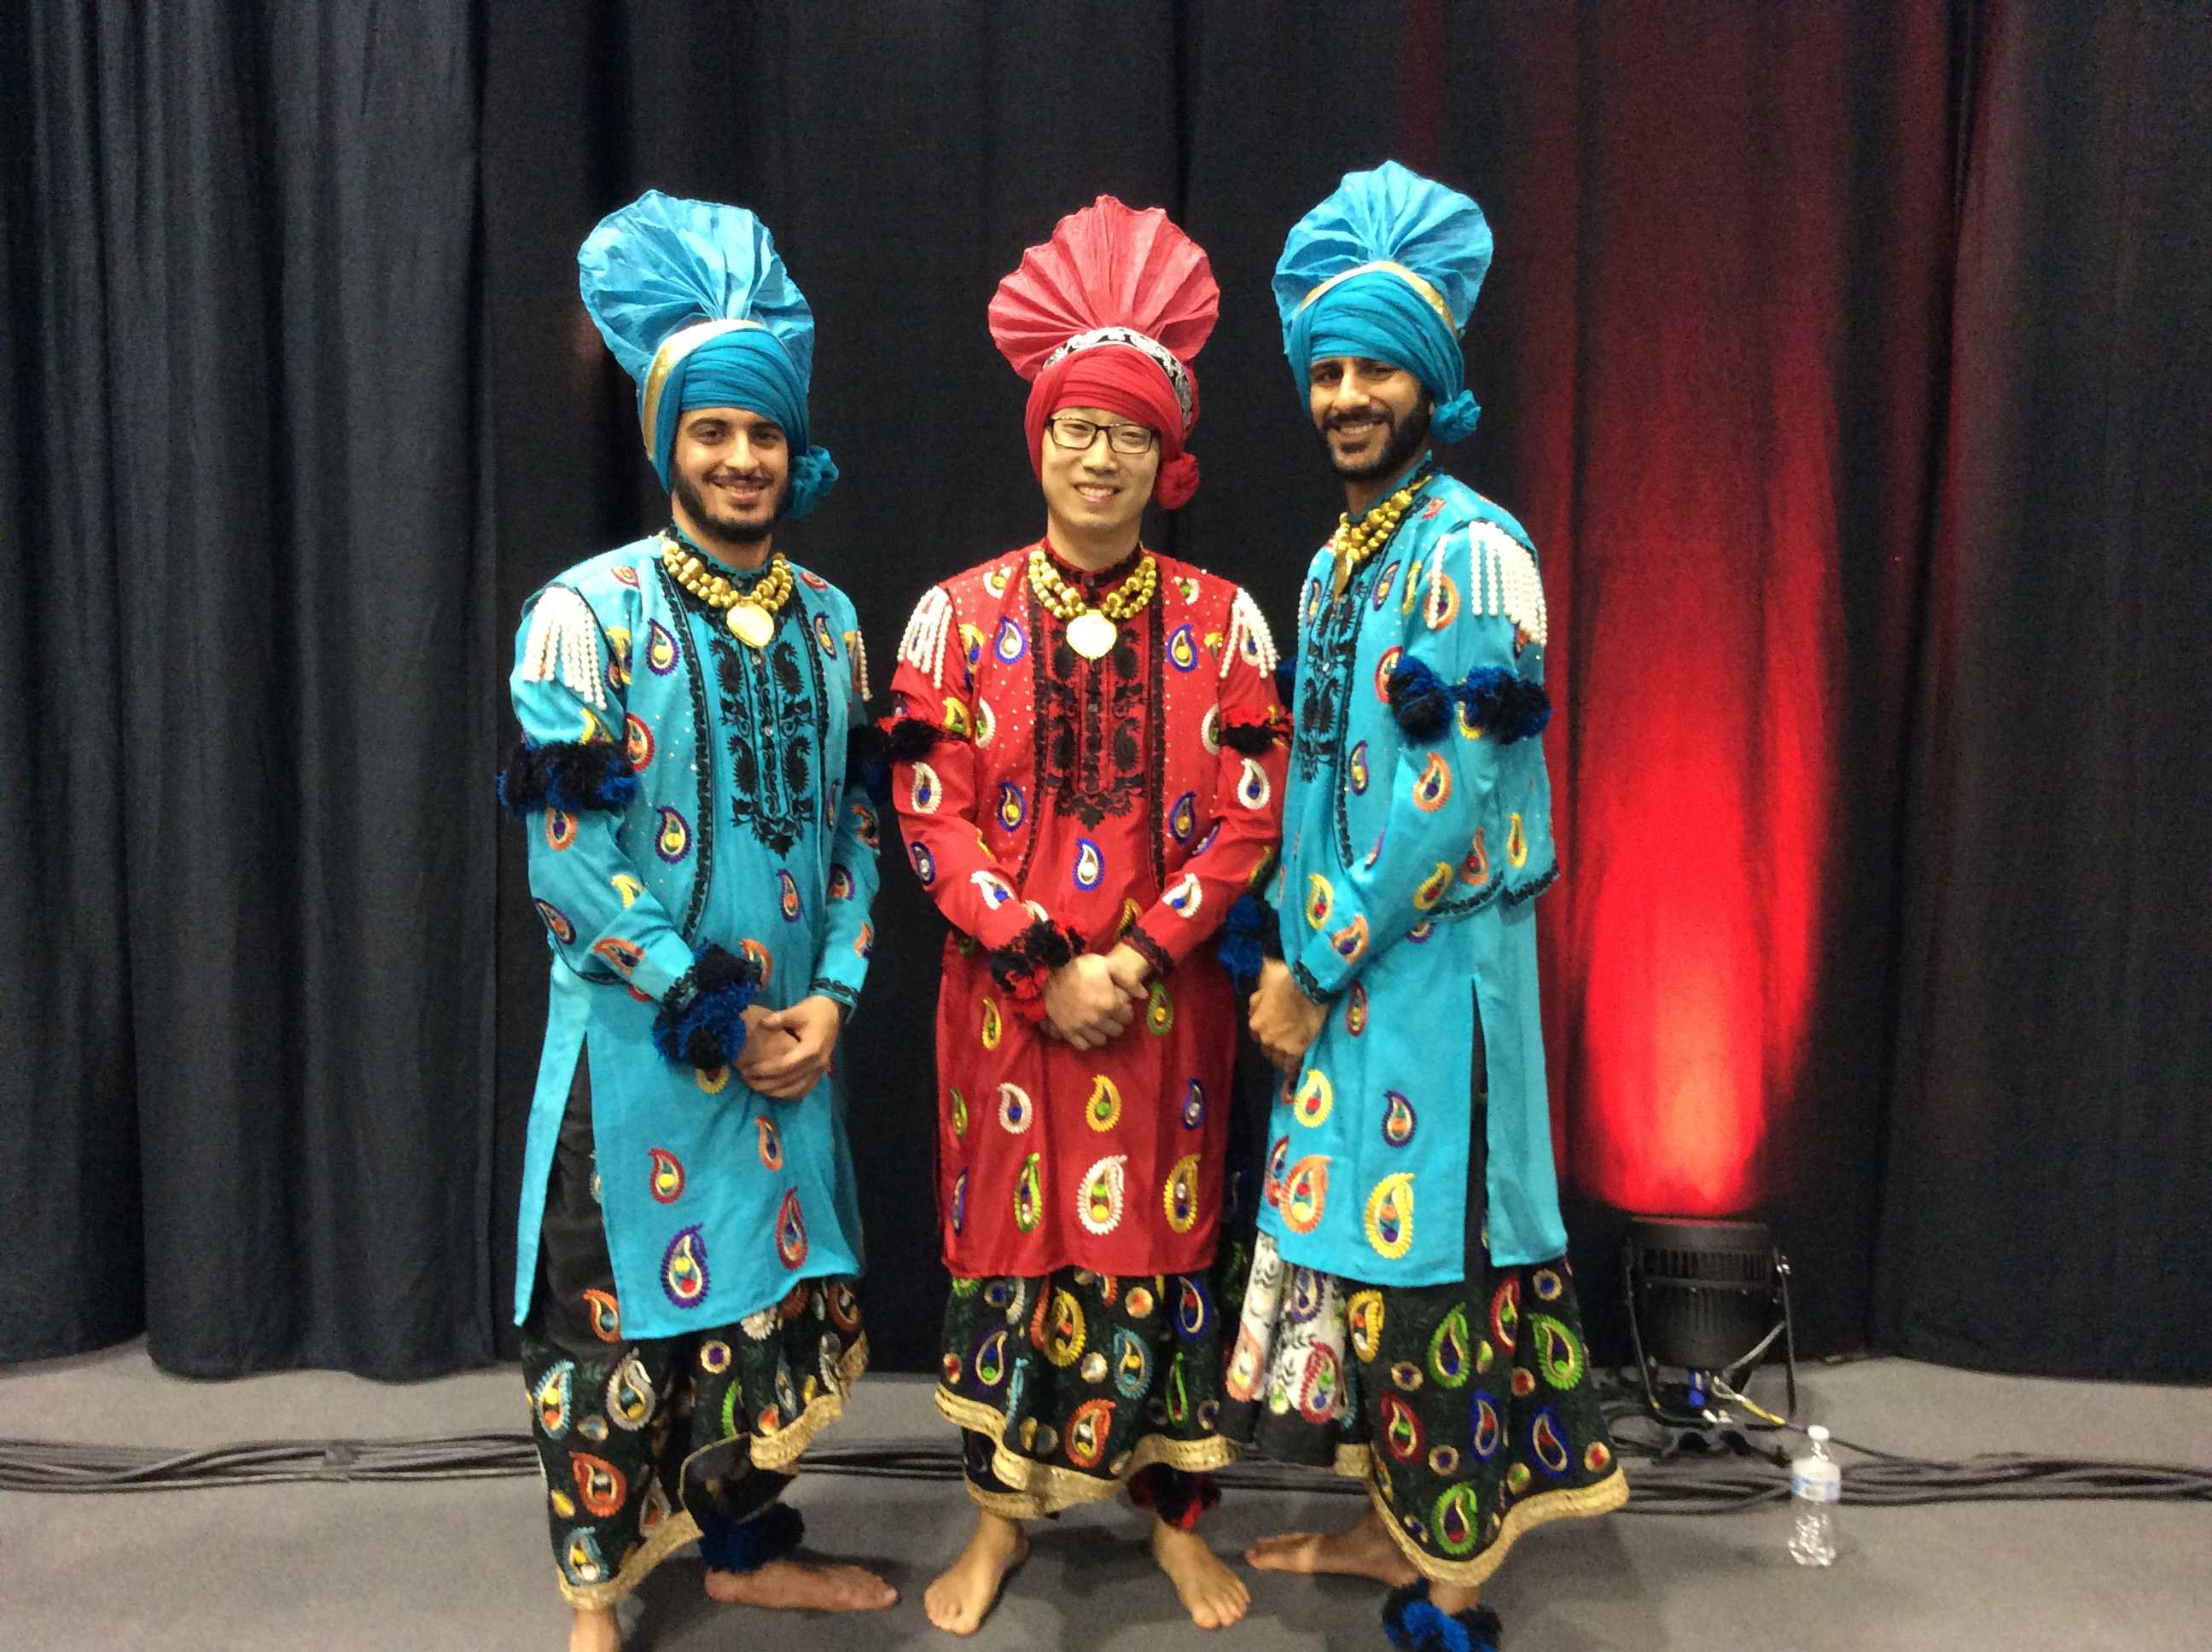 Pictured: Members of the all-male Bhangra team, Anakh E Gabroo